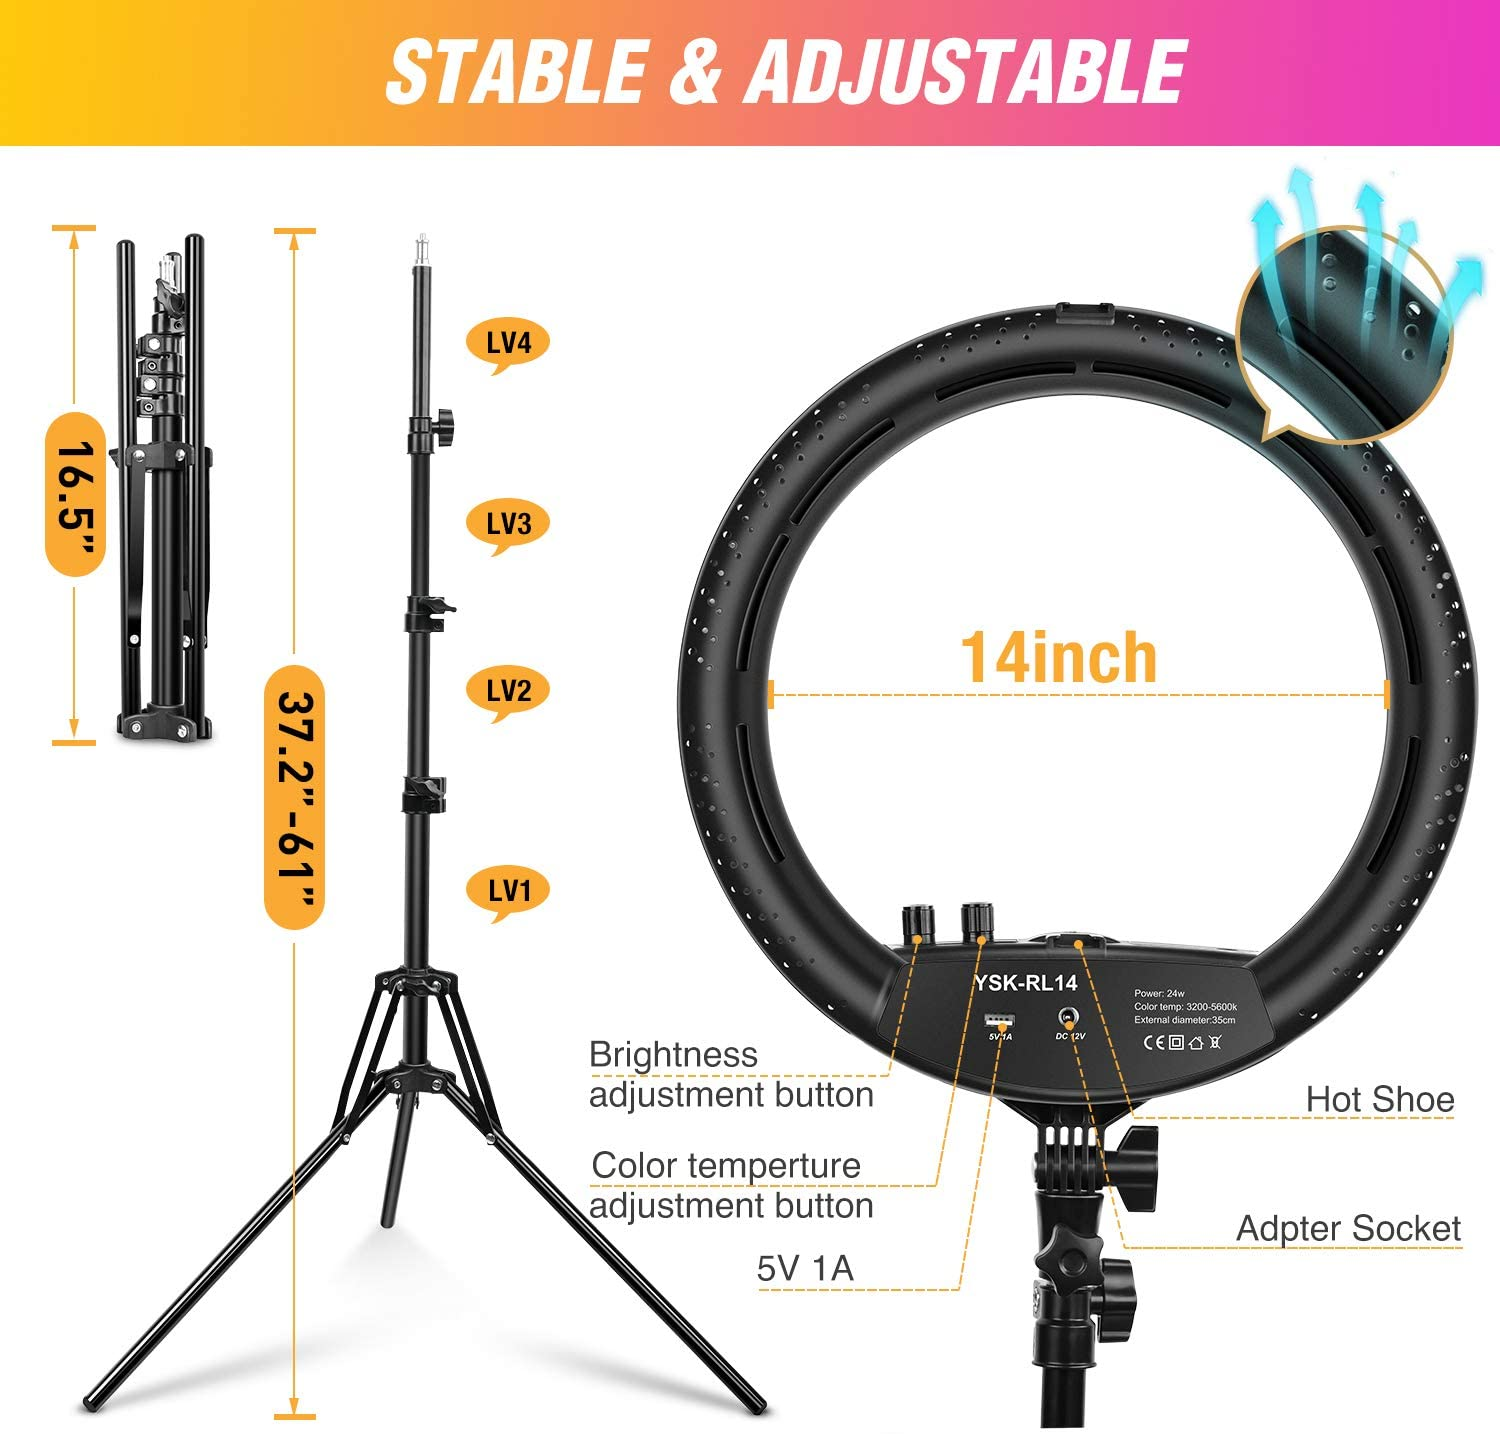 Osaka 18 Inches LED Ring Light 65W adjustable Color Temperature Wireless  Remote Control 9 Feet Light Stand For MX Takatak Instagram vlog YouTube  Video Shooting Compatible With DSLR Camera Smartphones. : Amazon.in:  Electronics